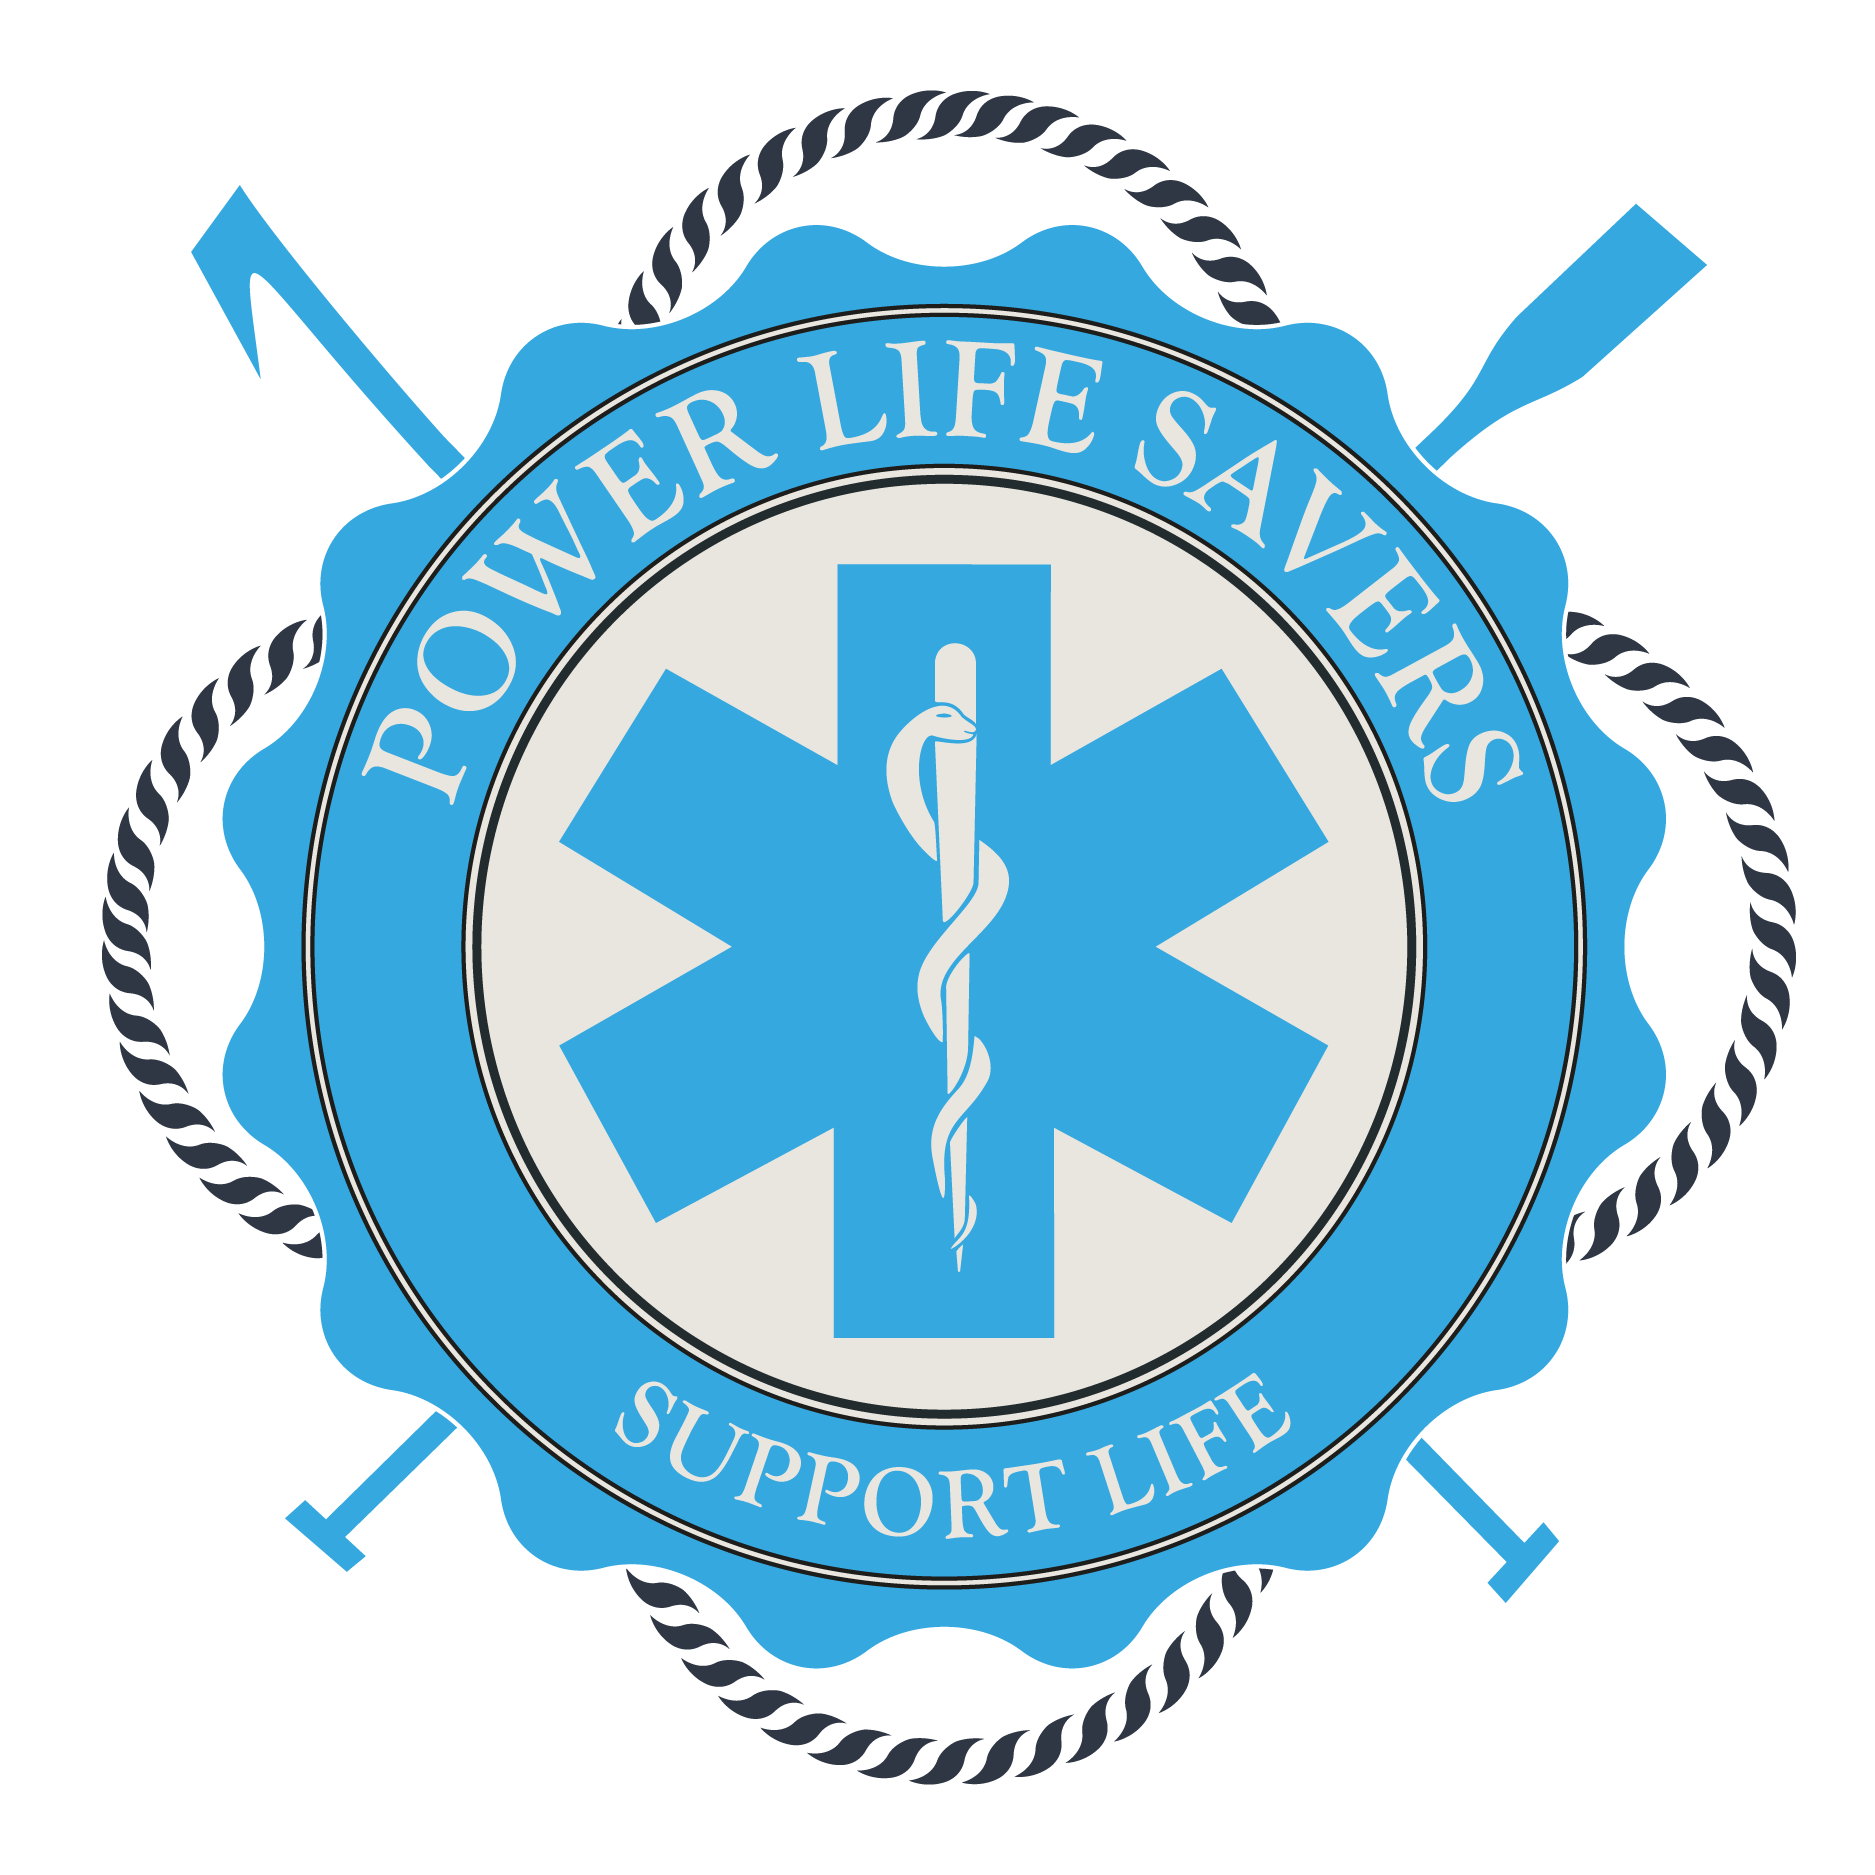 A Powerful Organization in Cyprus Specialized on Ambulance, First Aid, First Responders, Paramedics, Nurses, Doctors and Lifeguards Services, and Trainings.